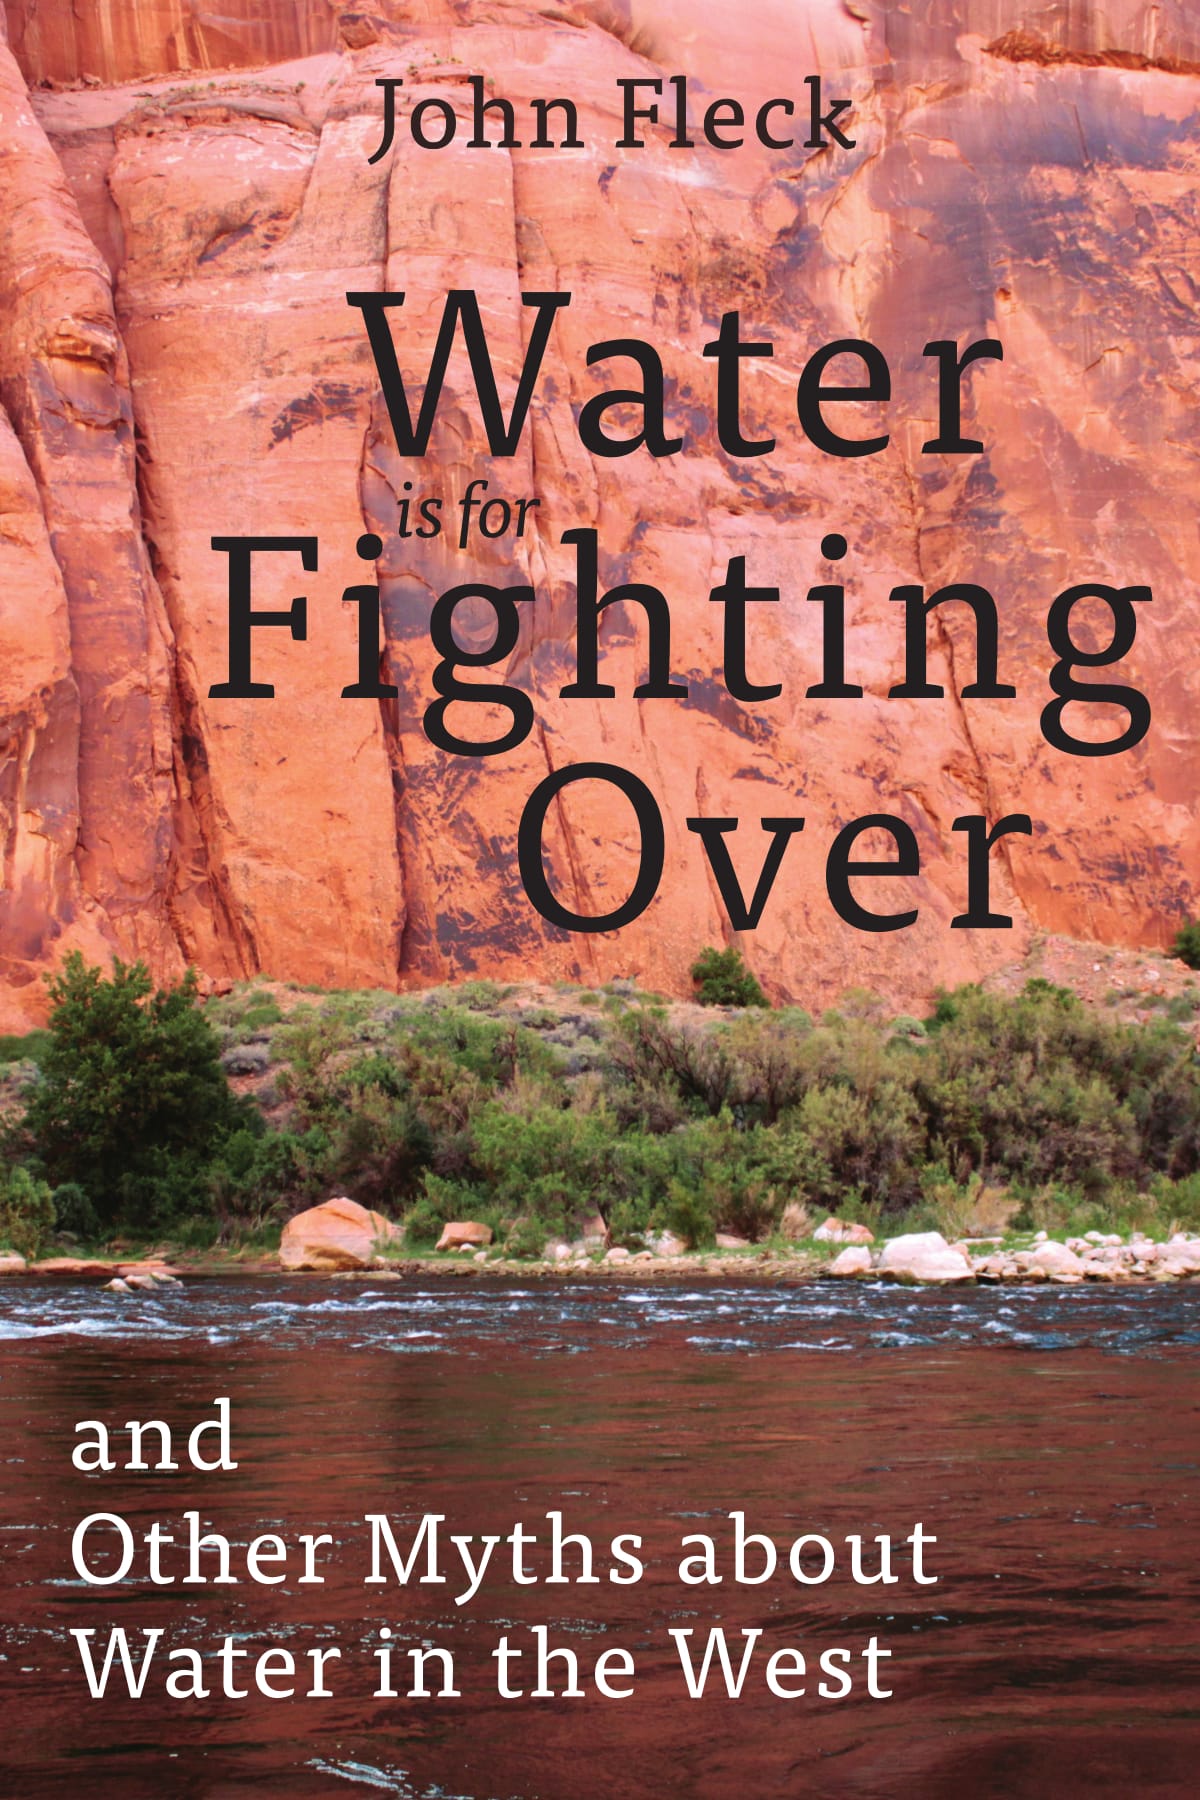 Photo: Colorado River book Water is for fighting over Cover